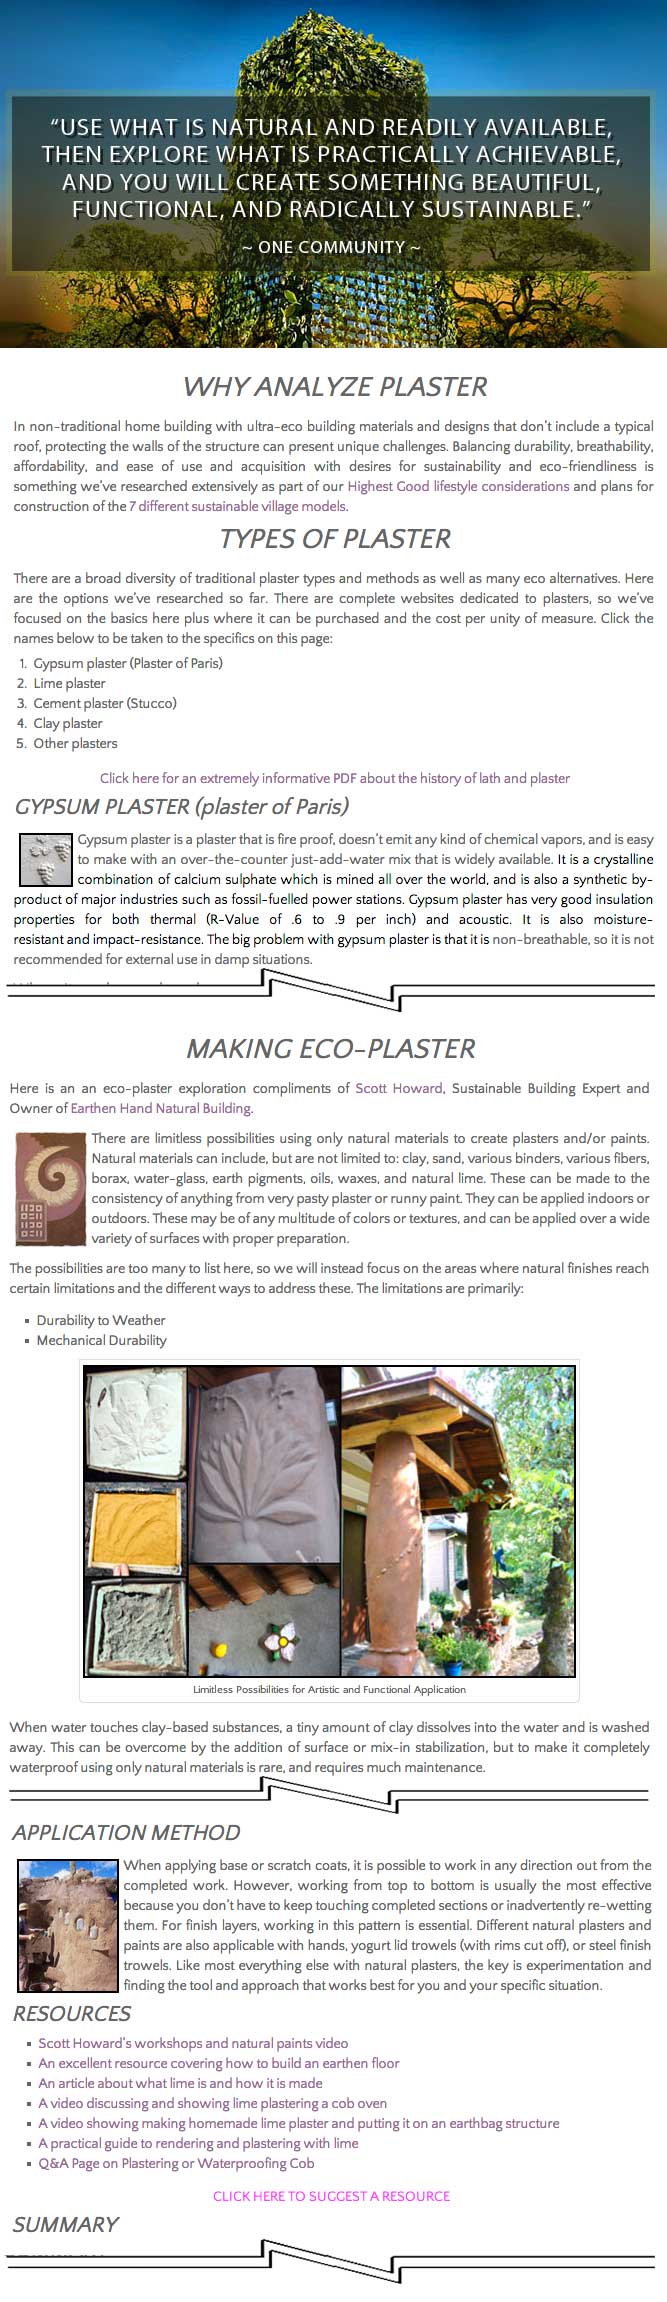 Plaster page, One Community